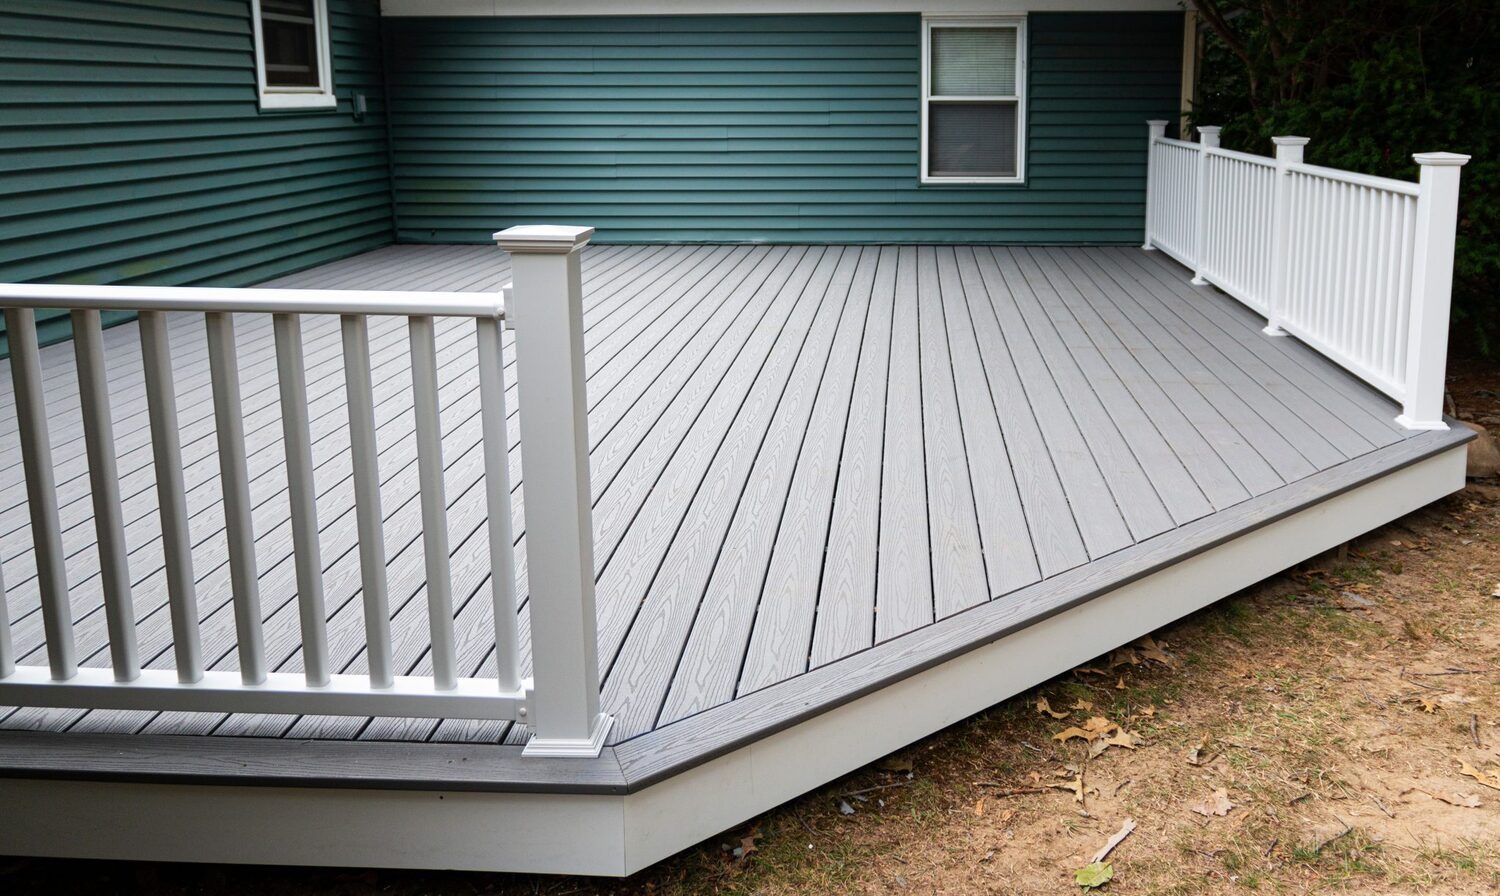 wooden backyard deck done by expert porch builders Highland Park based